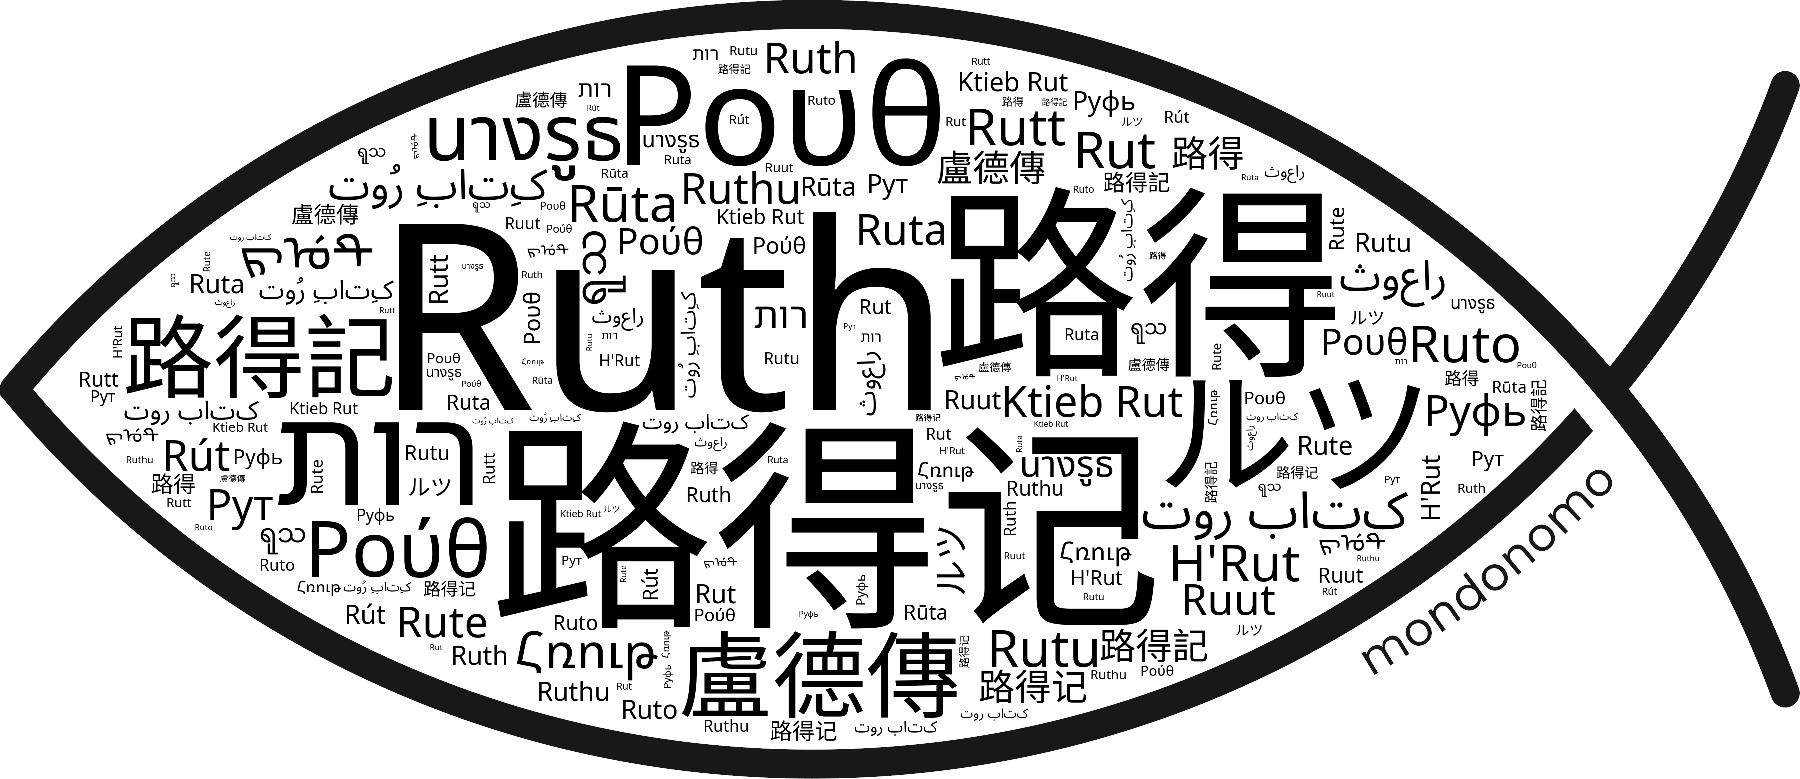 Name Ruth in the world's Bibles